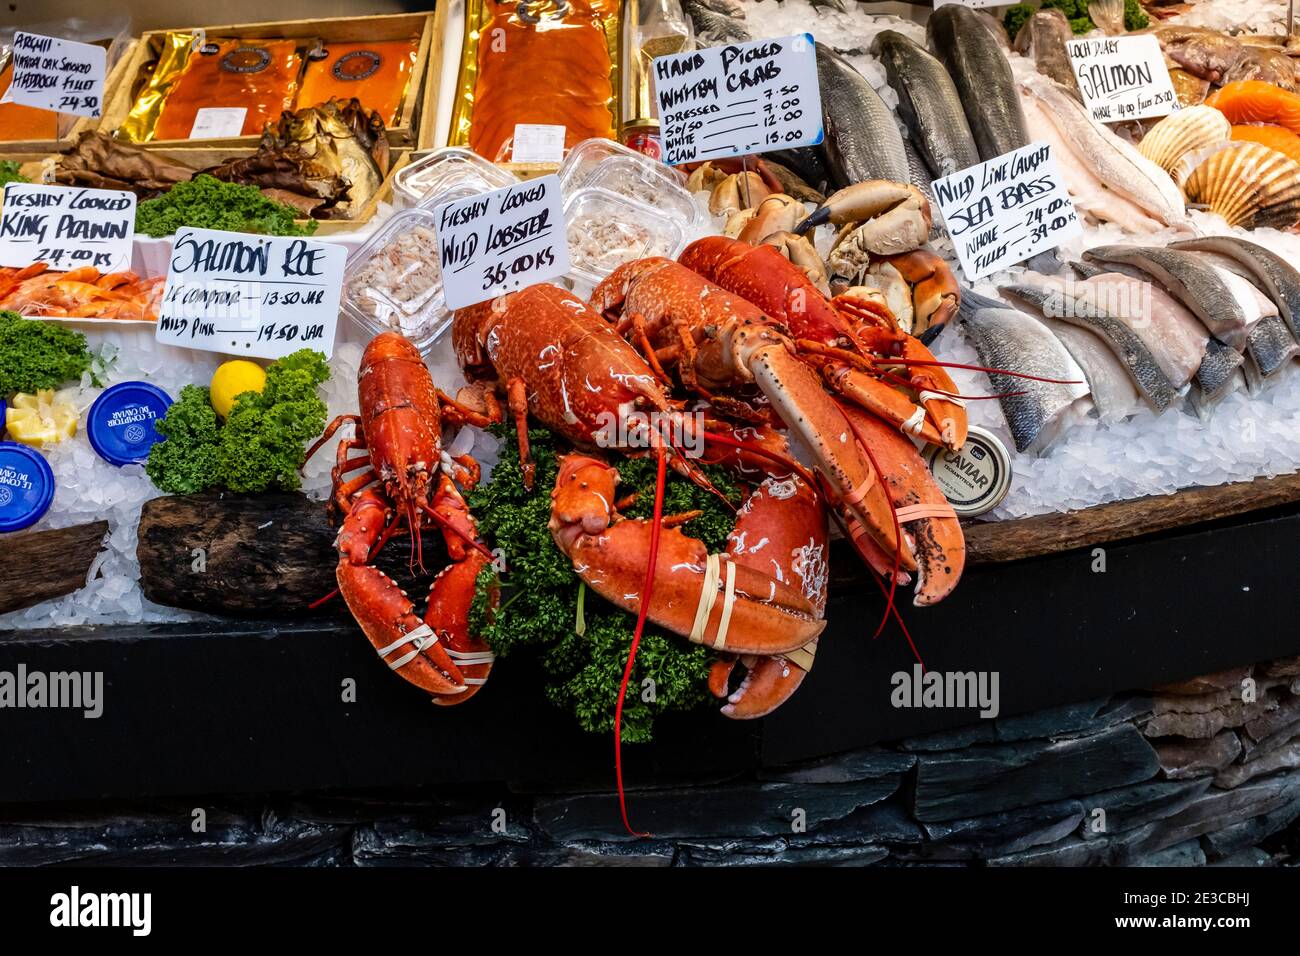 Fresh Lobsters For Sale At Borough Market, London, UK. Stock Photo